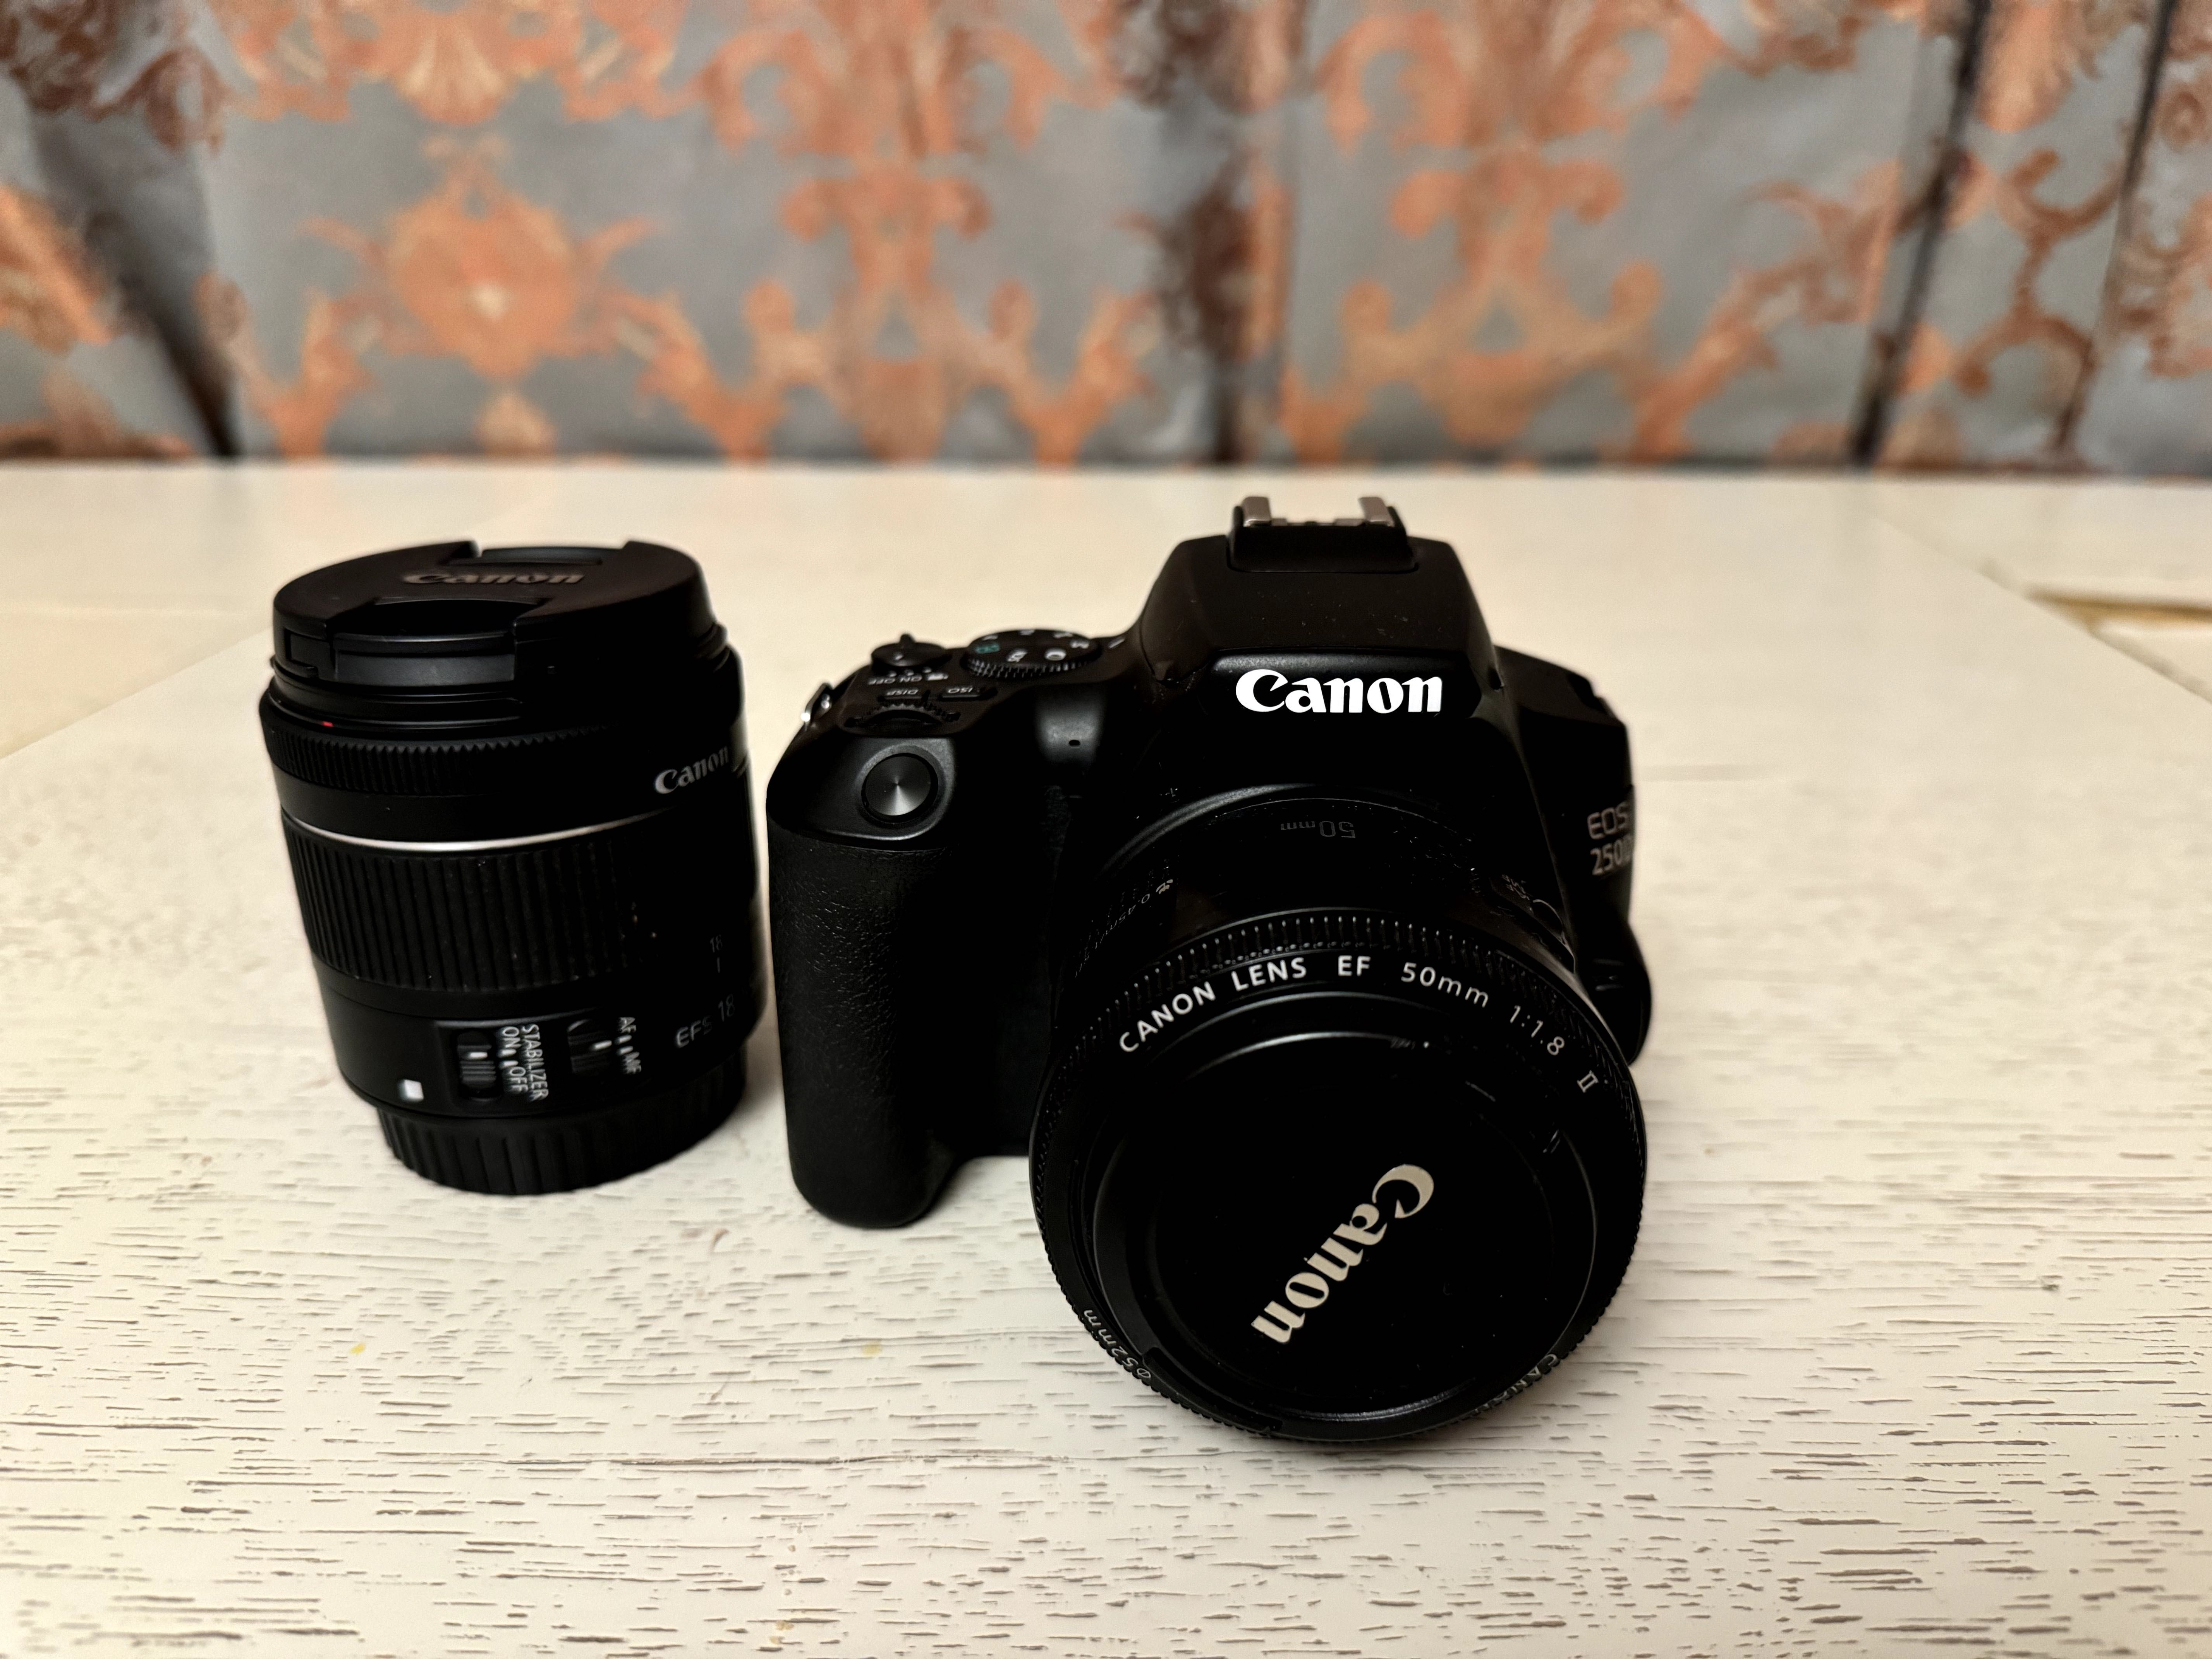 Canon eos 250d, kit 18-55mm f/3.5-5.6, canon ef 50mm f1.8